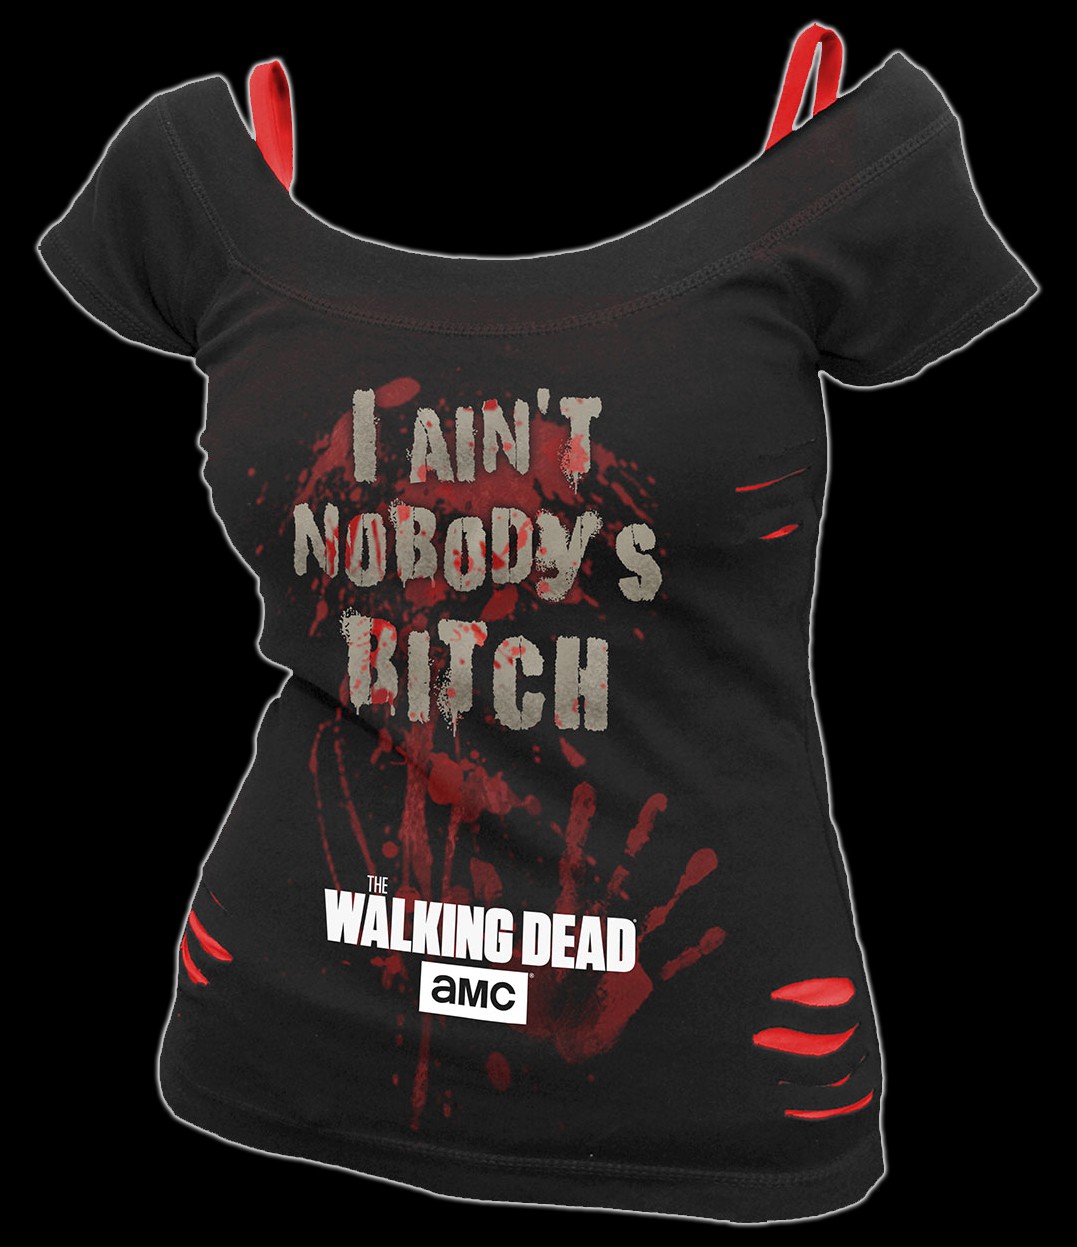 The Walking Dead - Nobody's Bitch - 2in1 Ripped Shirt